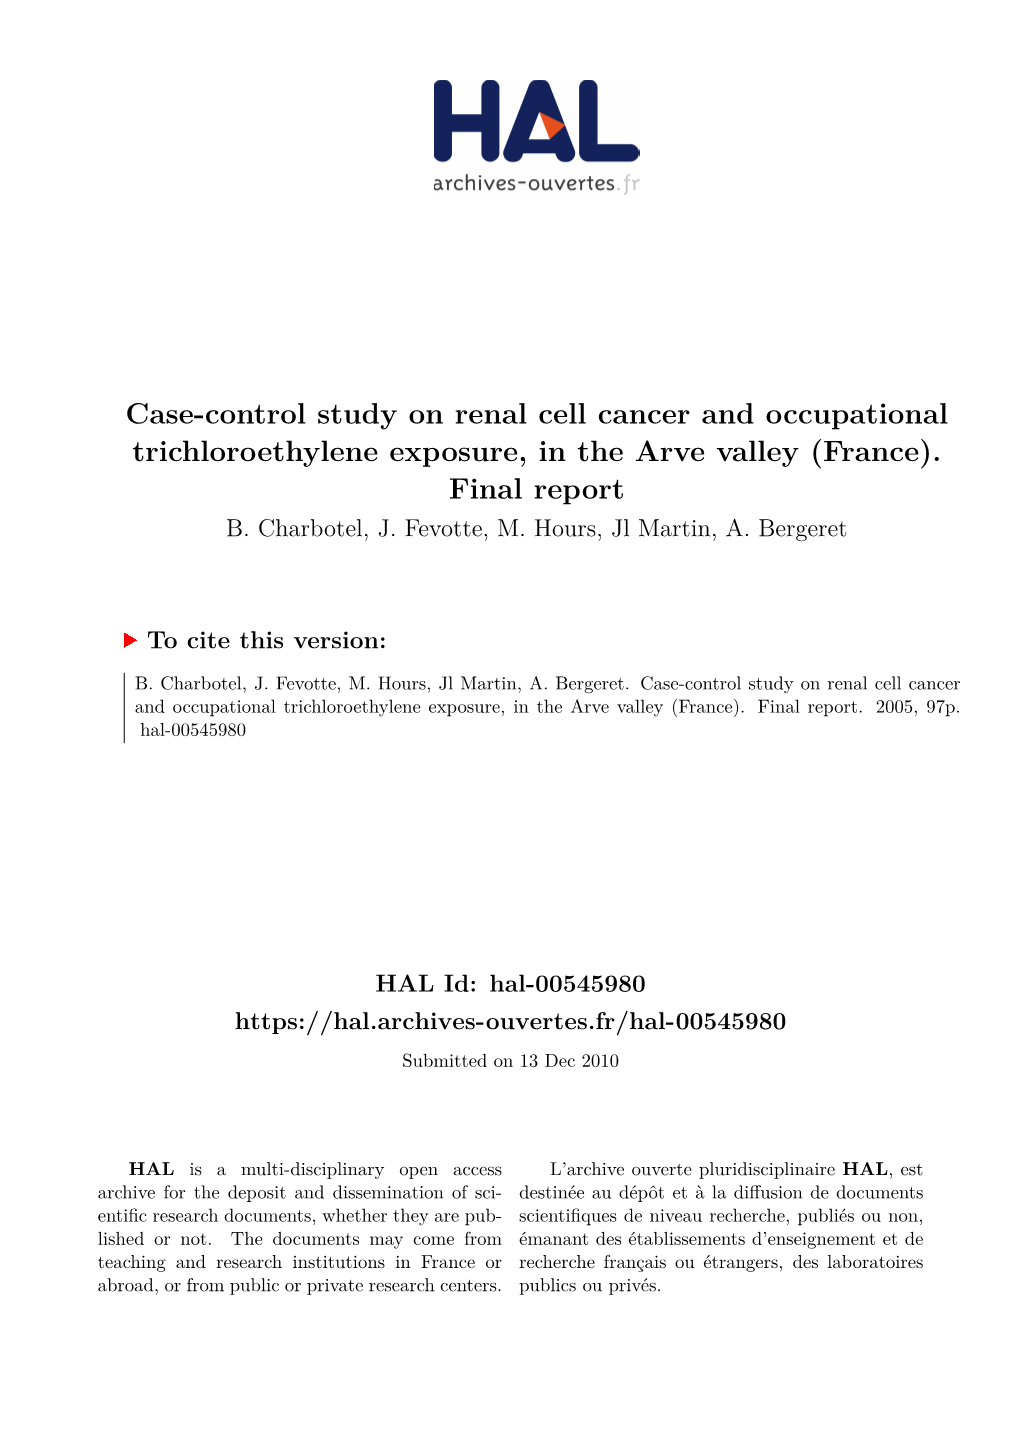 Case-Control Study on Renal Cell Cancer and Occupational Trichloroethylene Exposure, in the Arve Valley (France)